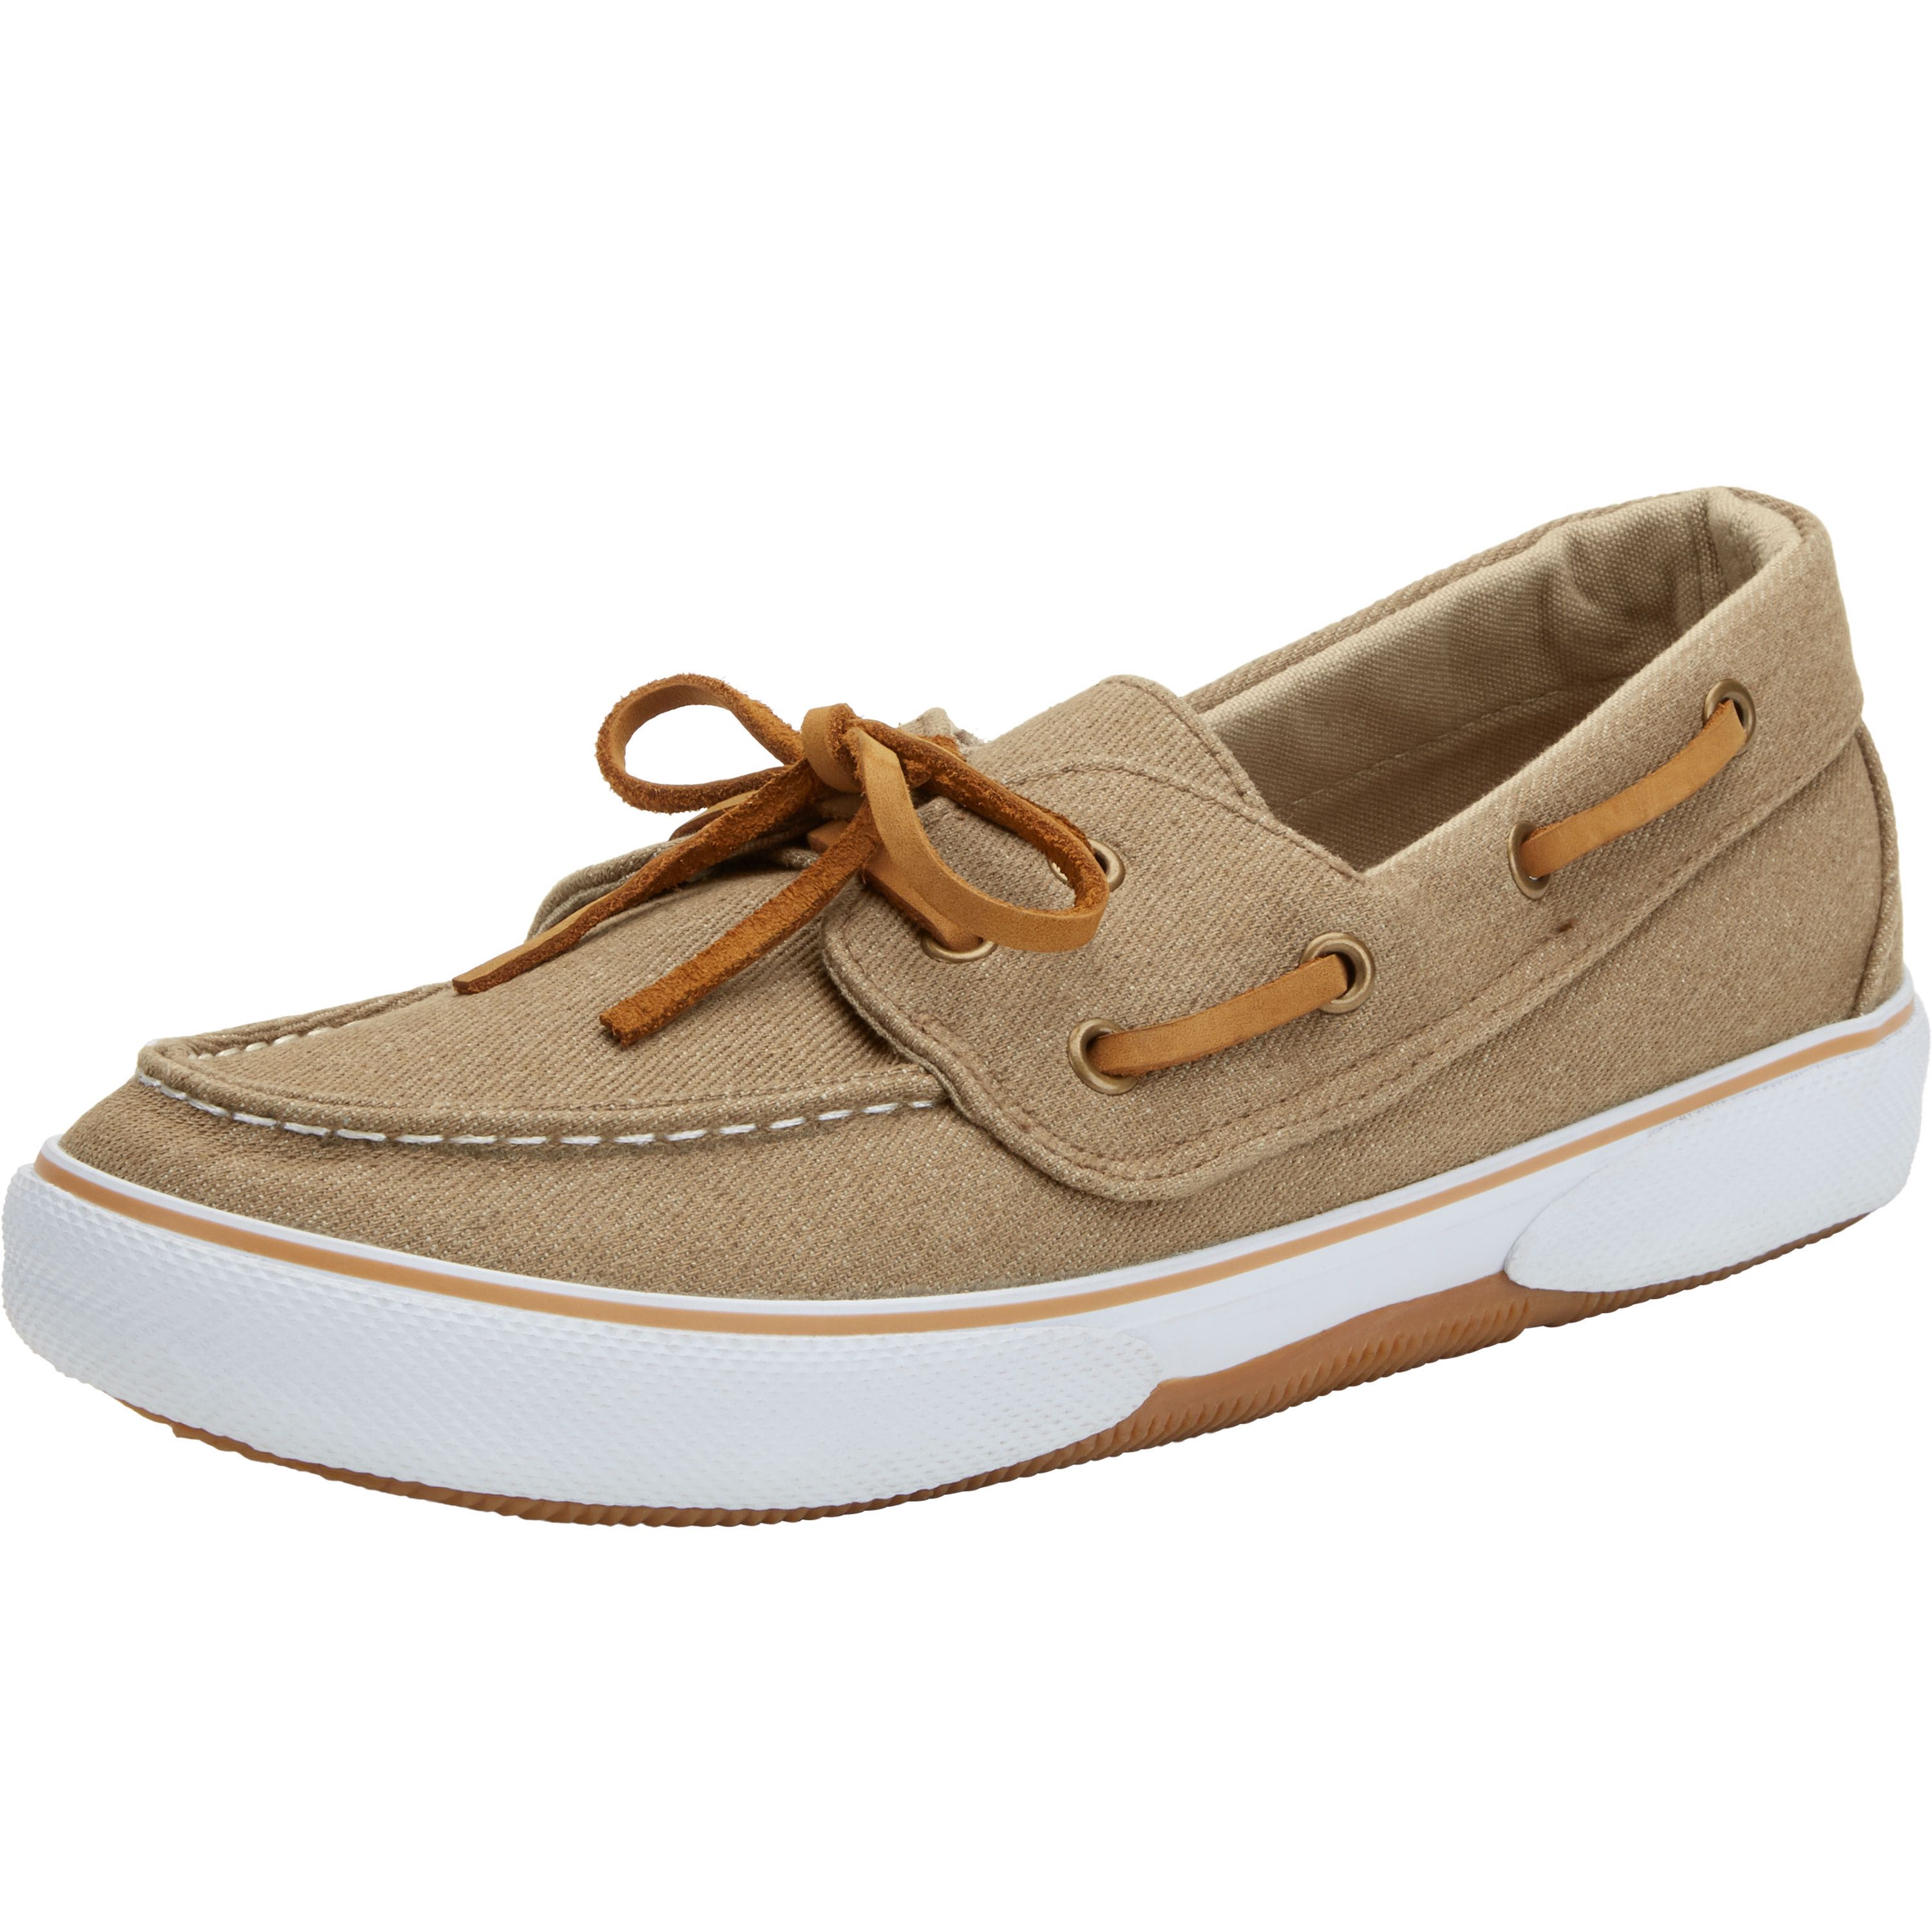 Kingsize Men's Big & Tall Canvas Boat Shoe Loafers Shoes - image 1 of 6